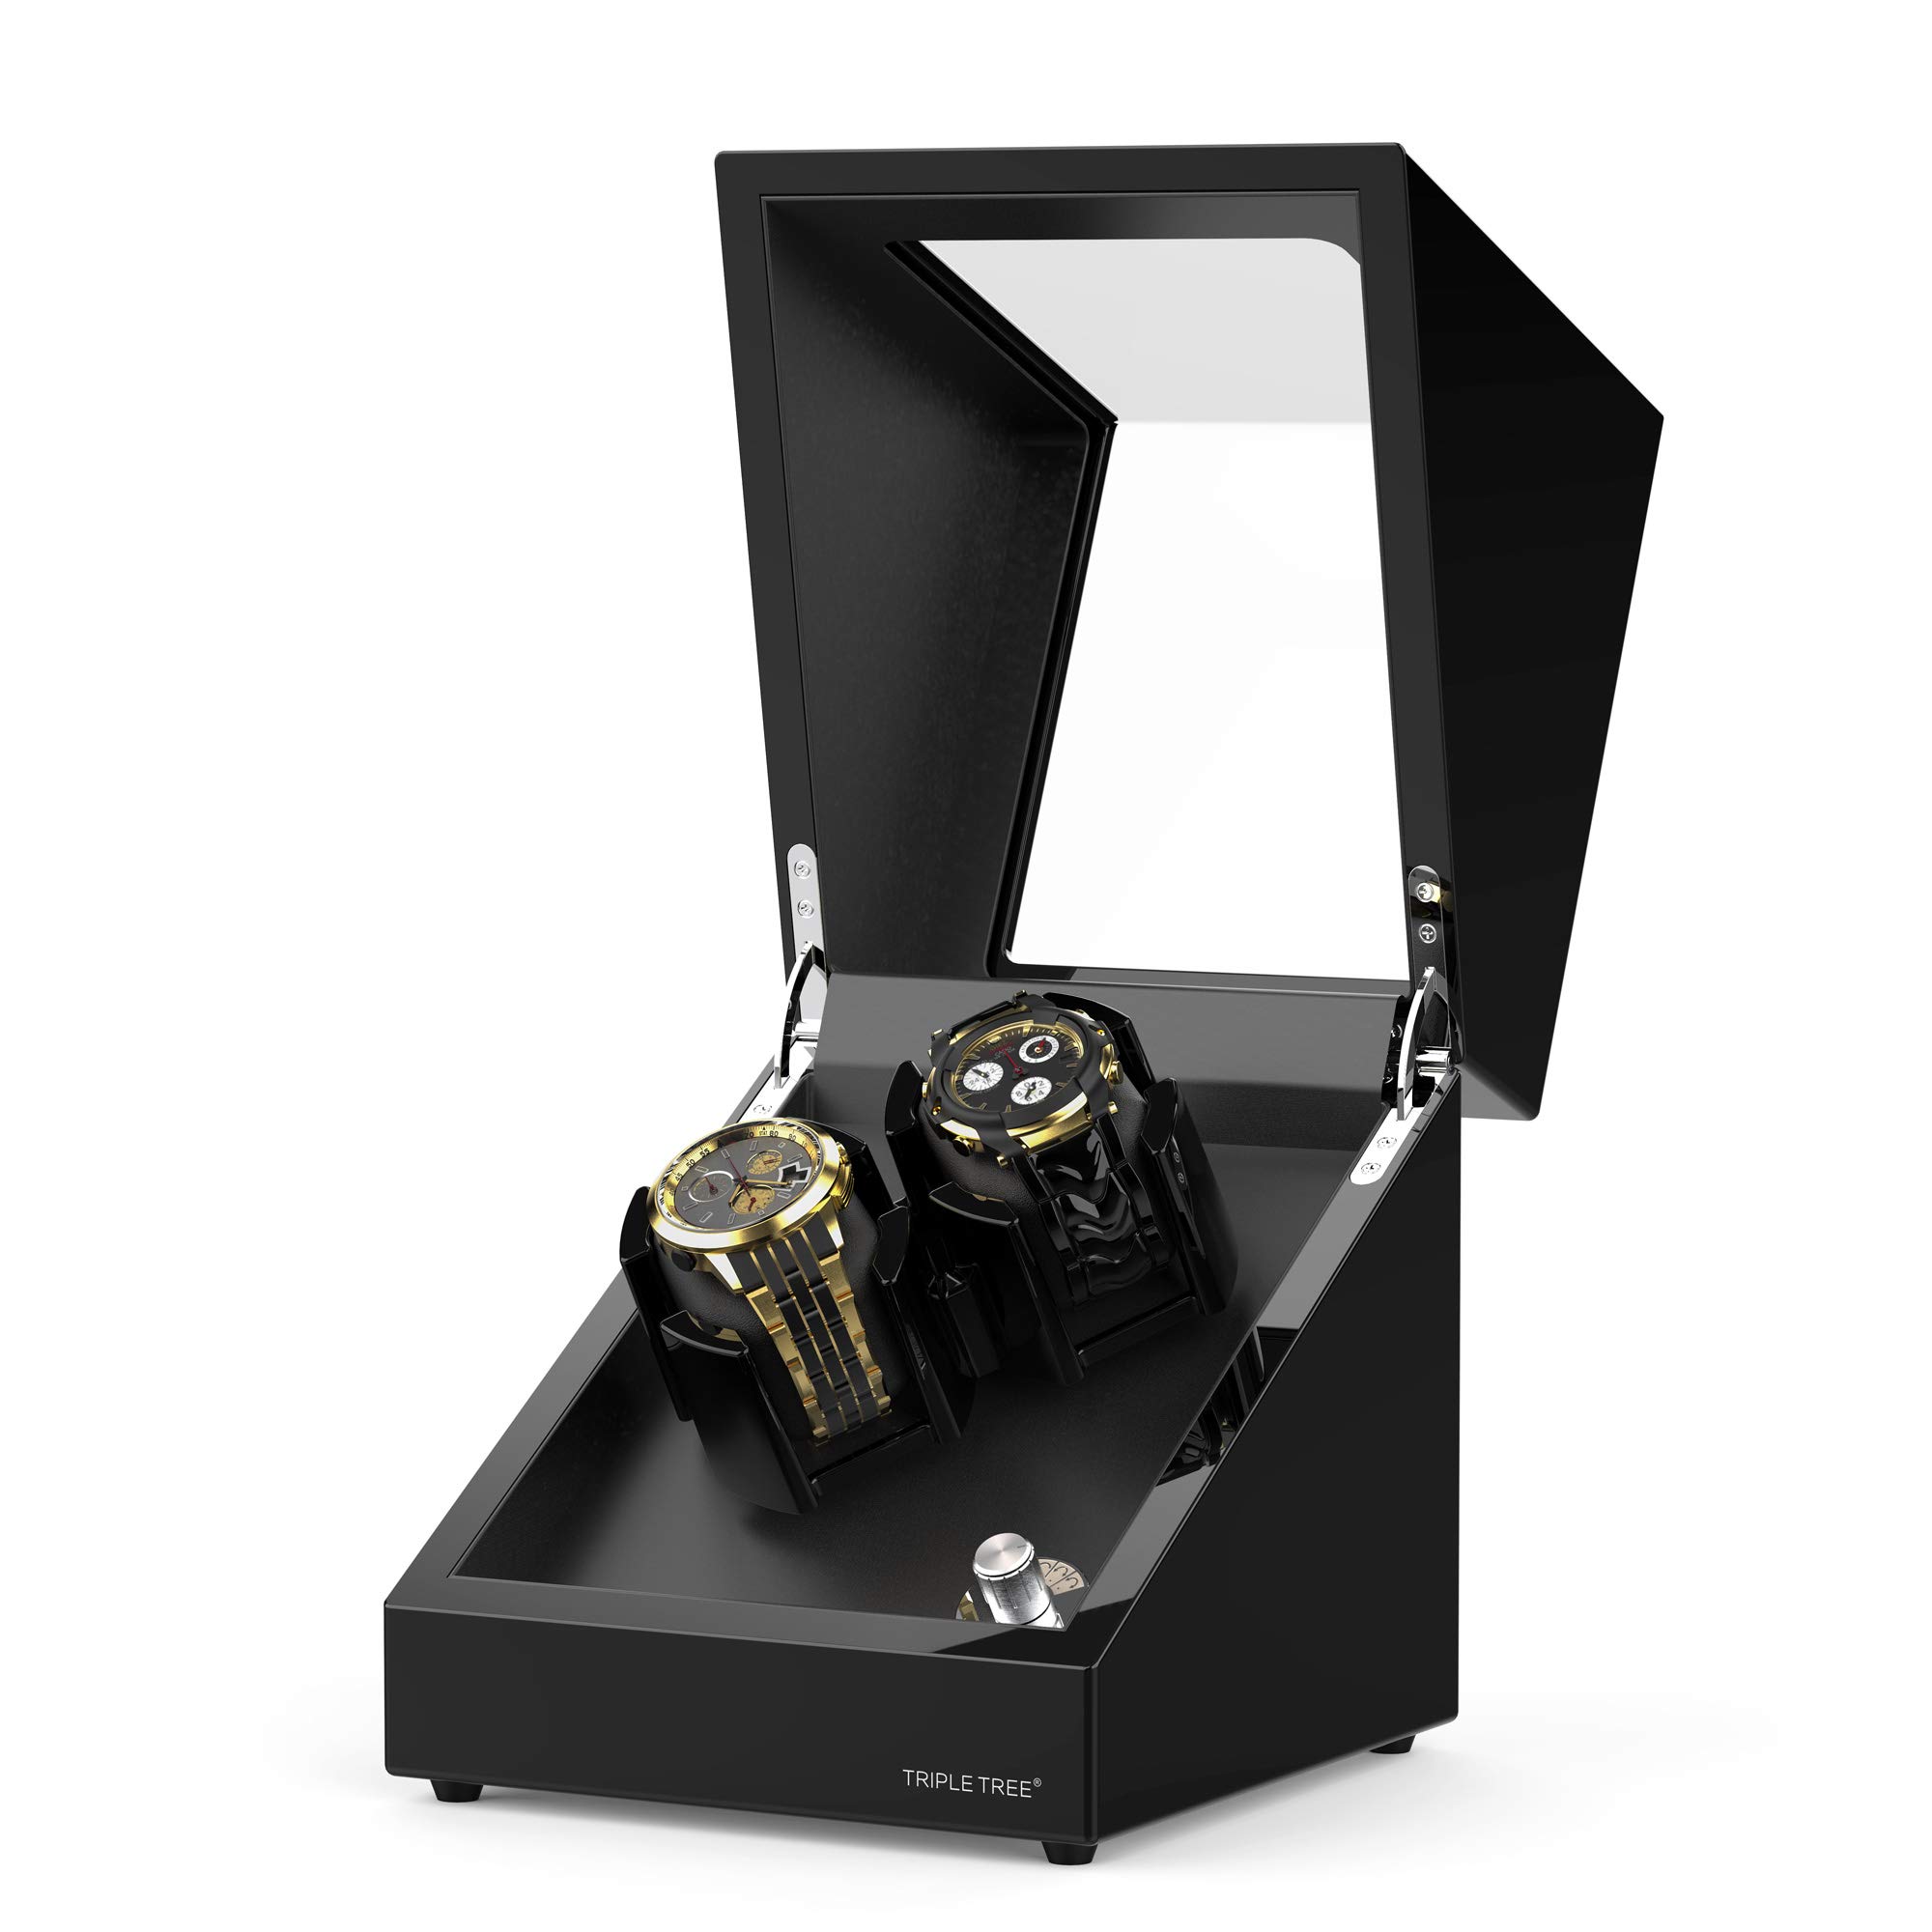 TRIPLE TREE Double Watch Winder for Automatic Watches, Automatic Watch Winder Box in Wood Shell Piano Finish, with Japanese Quiet Motor, Flexible PU-Leather Watch Pillows Hold for Women/Men's Watches